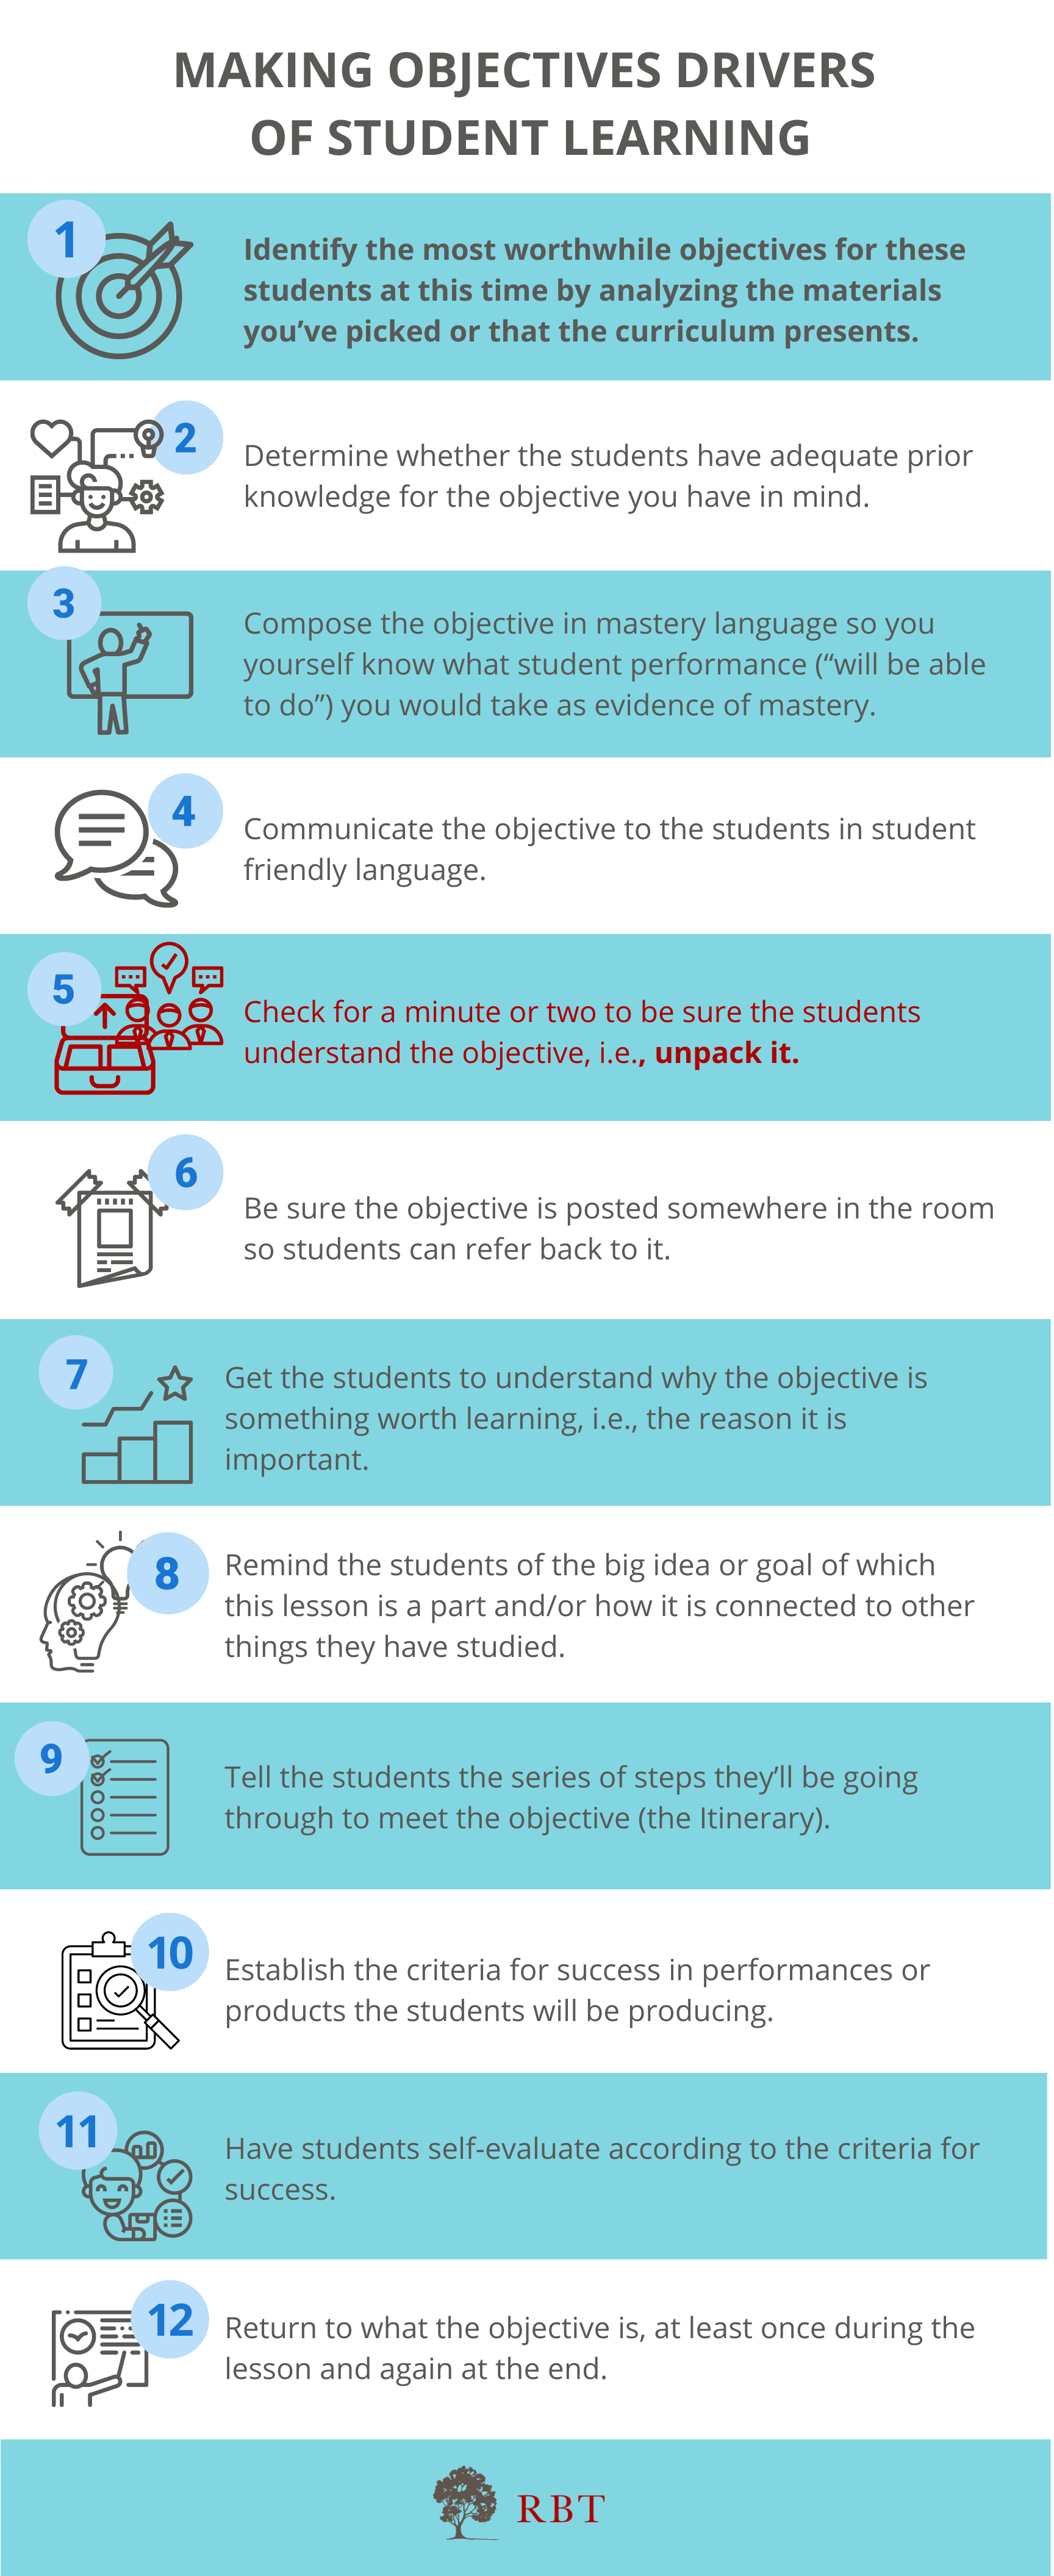 Teacher Actions to Make Objectives Drivers of Student Learning (18 × 50 in).png